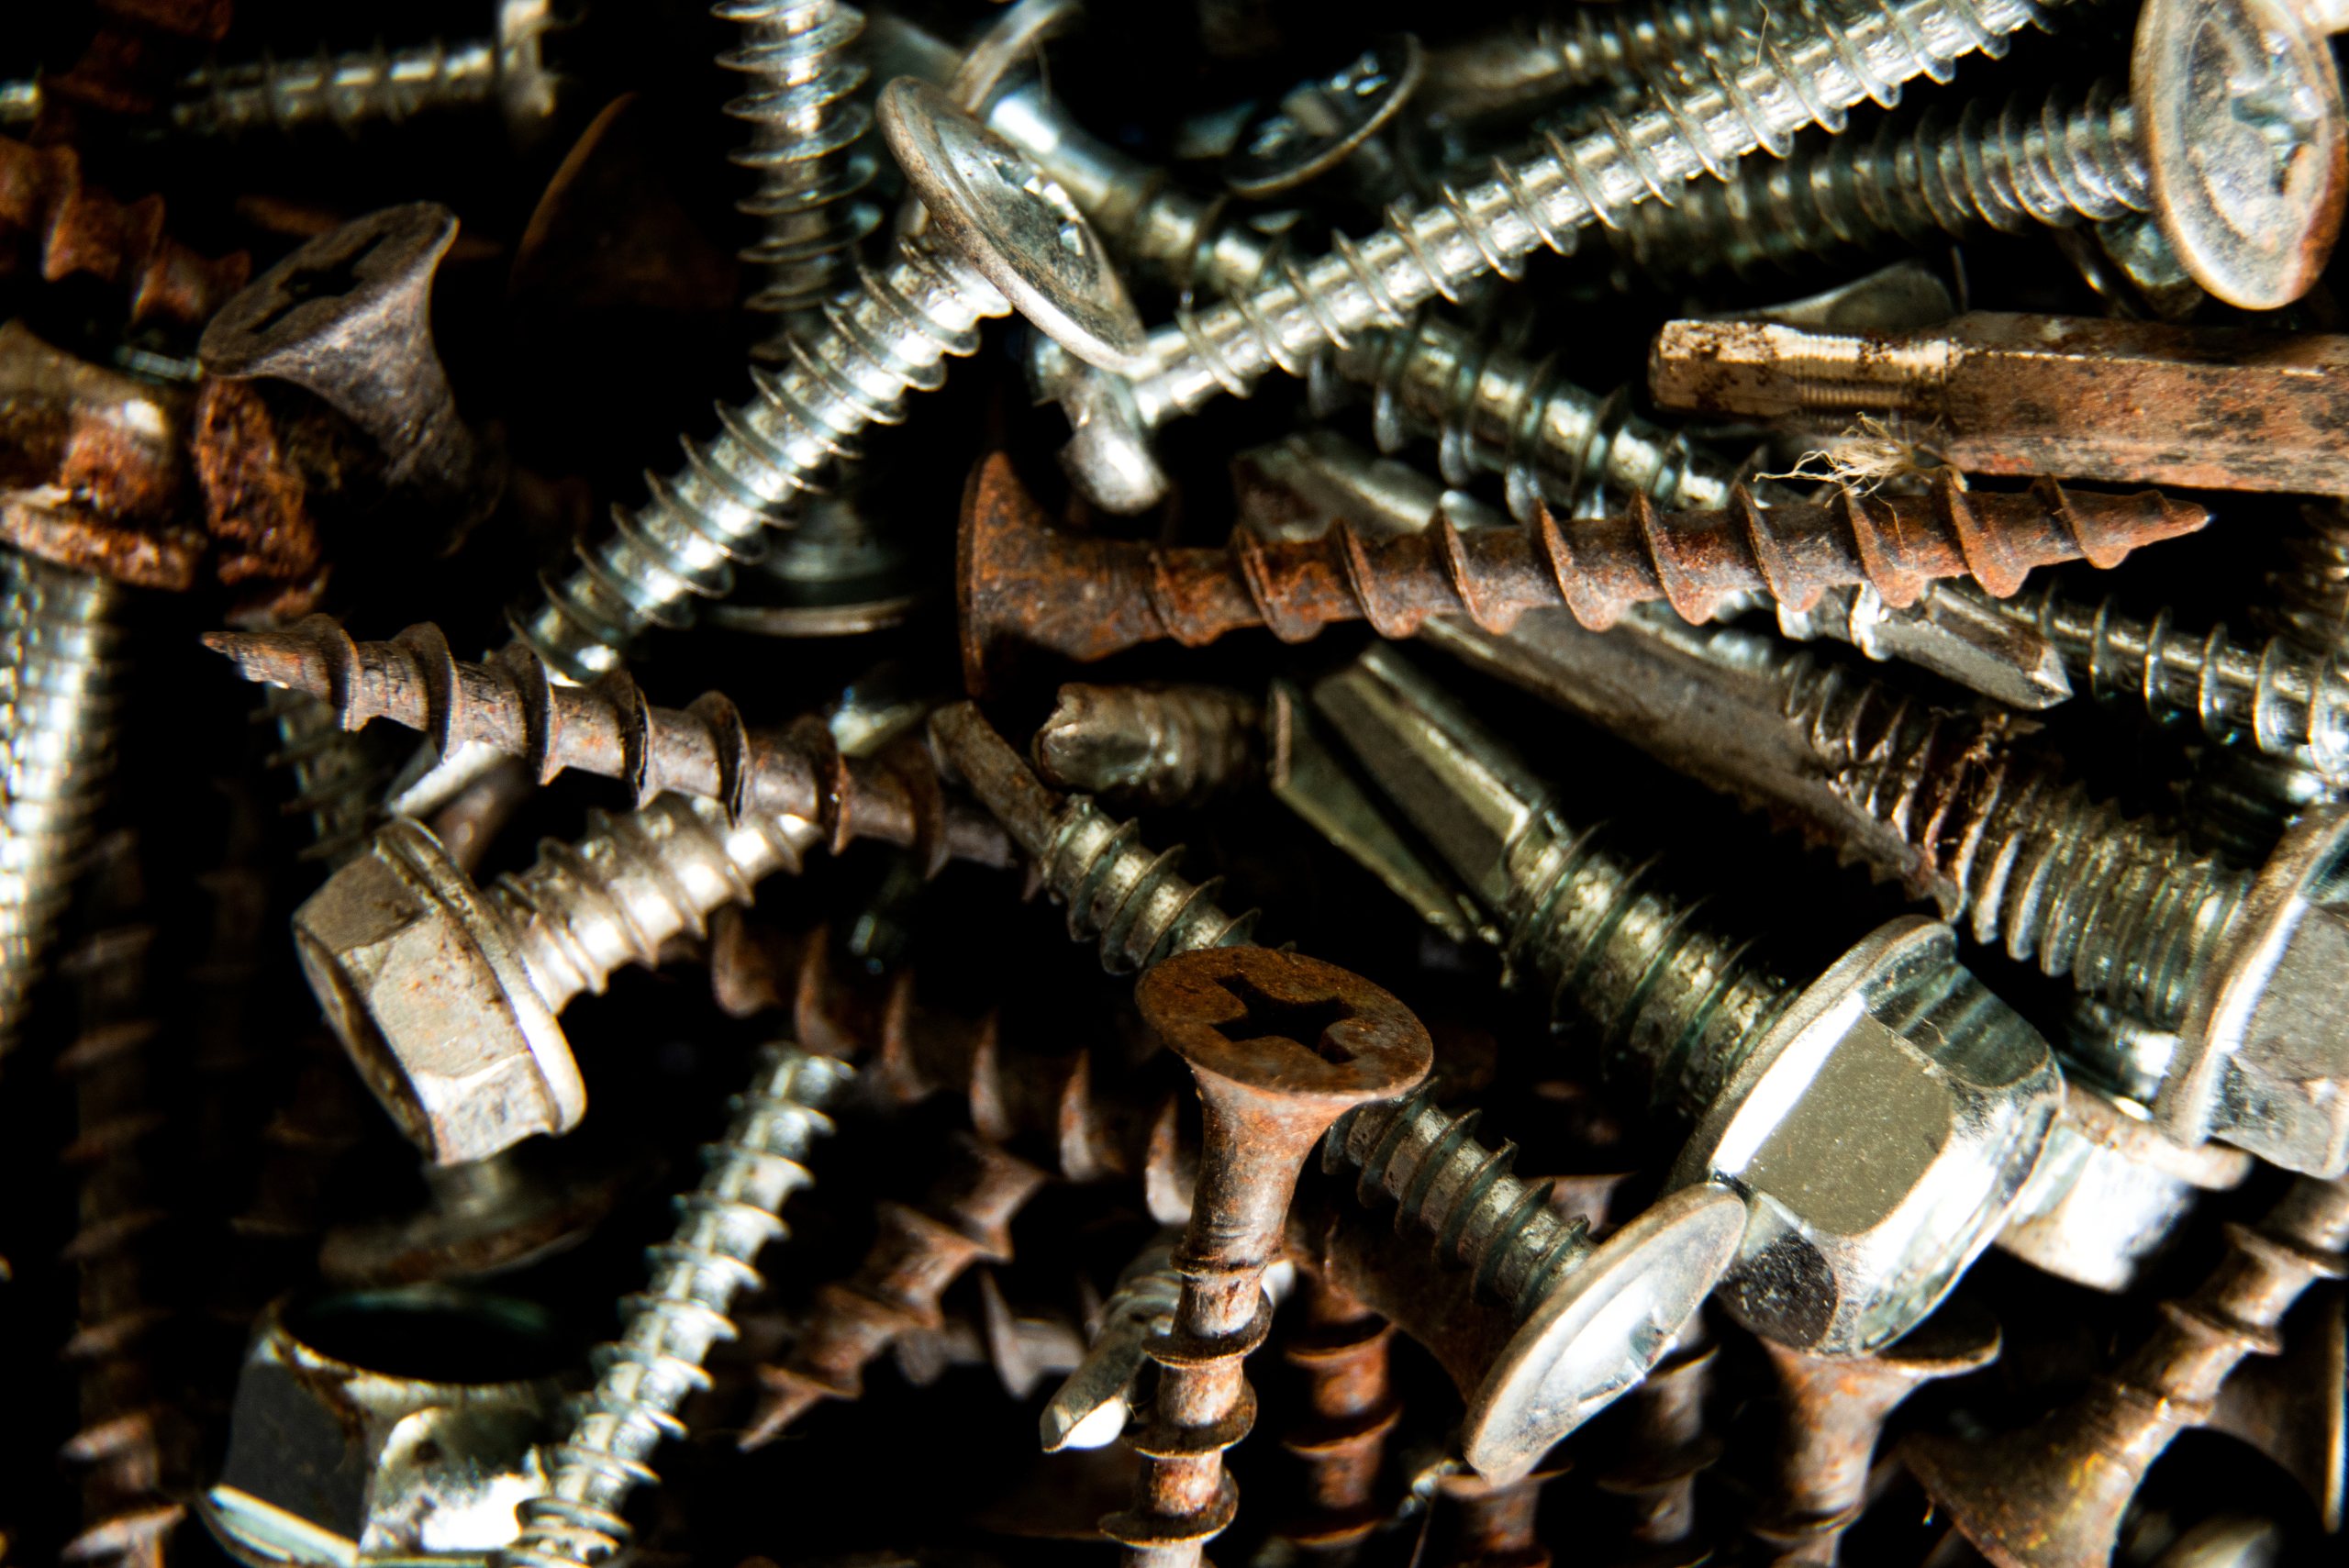 An assortment of screws, some are rusty.